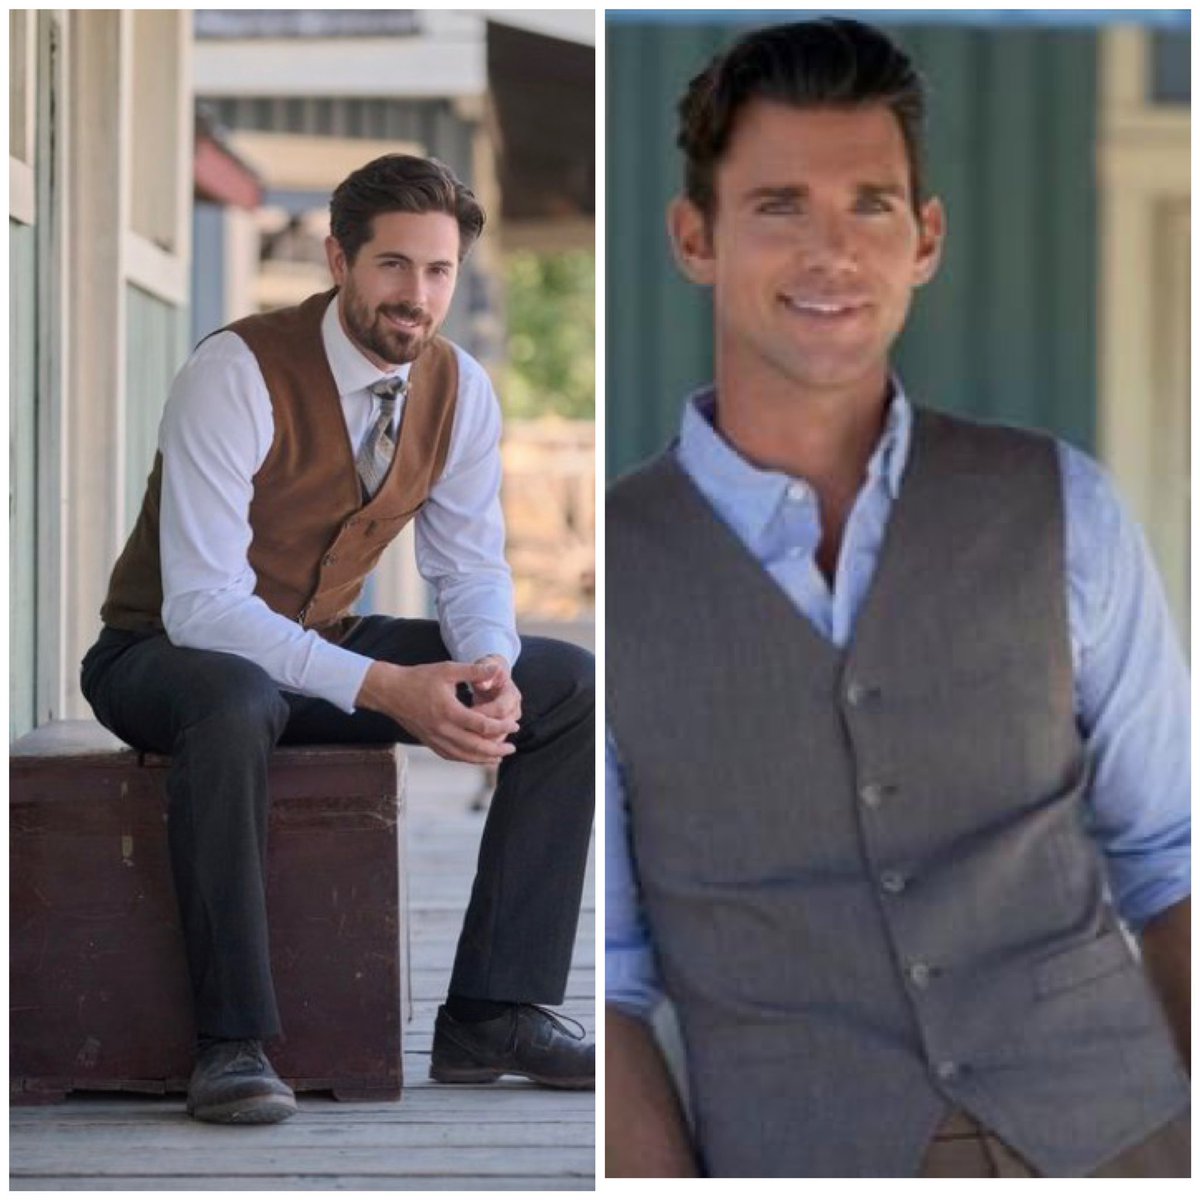 @wearehopevalley These are my favorite pictures of @ChrisMcNally_ and @kevin_mcGarry